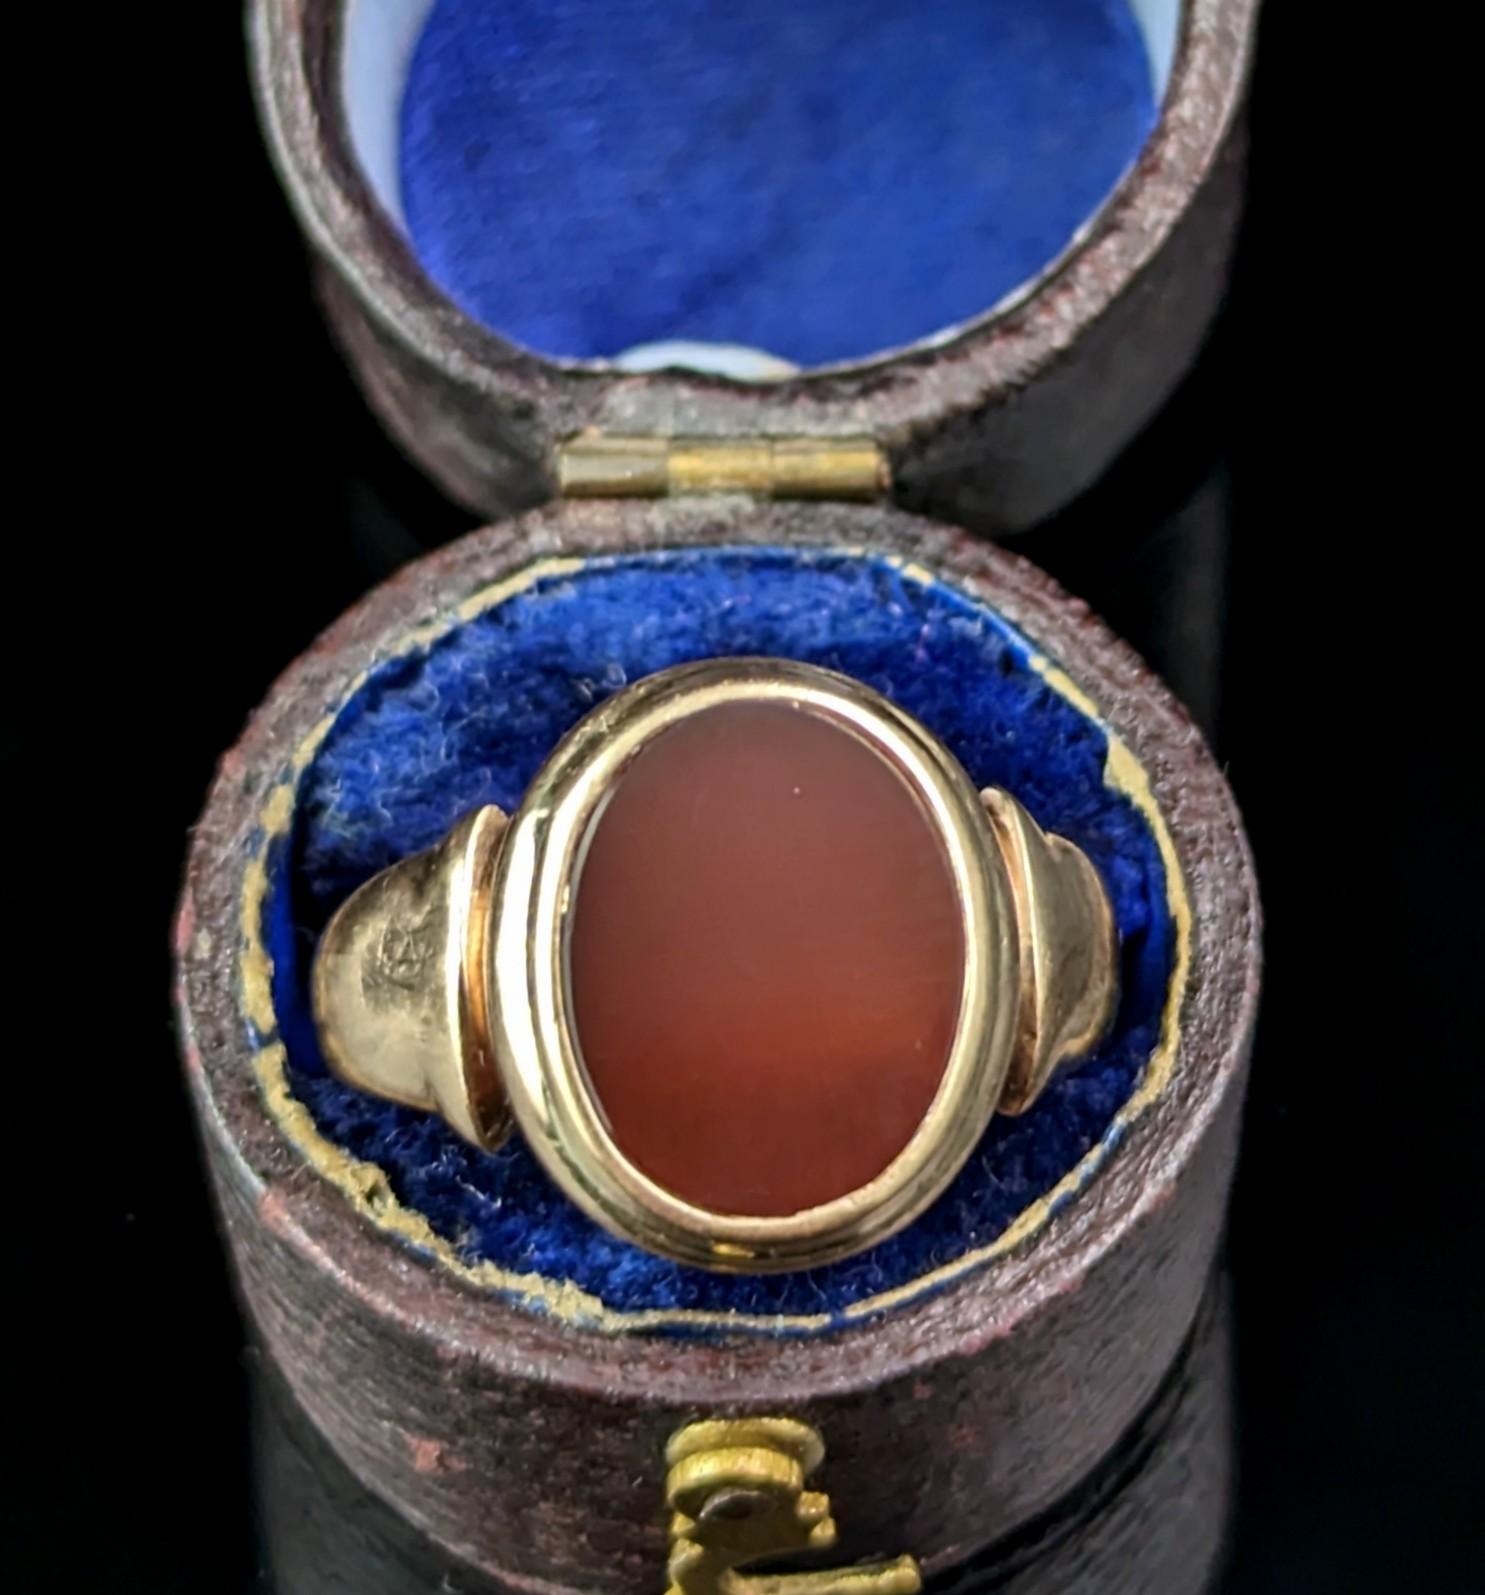 This handsome antique, Art Deco era
9ct gold and Carnelian signet ring has everything you could wish for in a signet ring!

It has an oval shaped face set with a rich orangey red Carnelian stone, this has not been carved so the stone could be